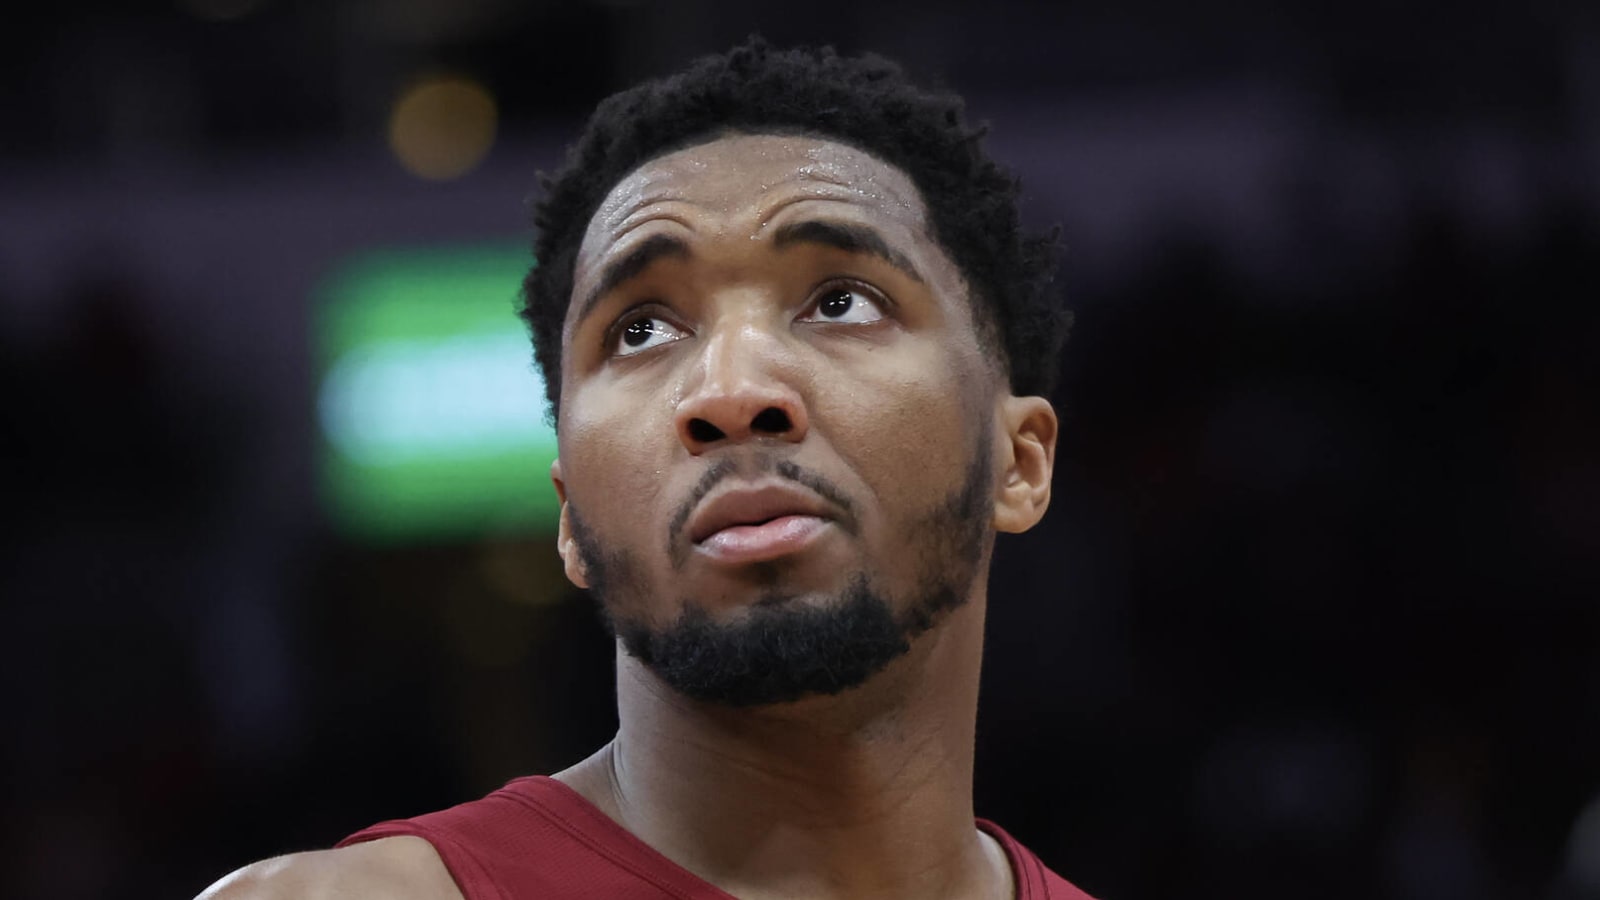 Cavs star expected to miss more time after brief return